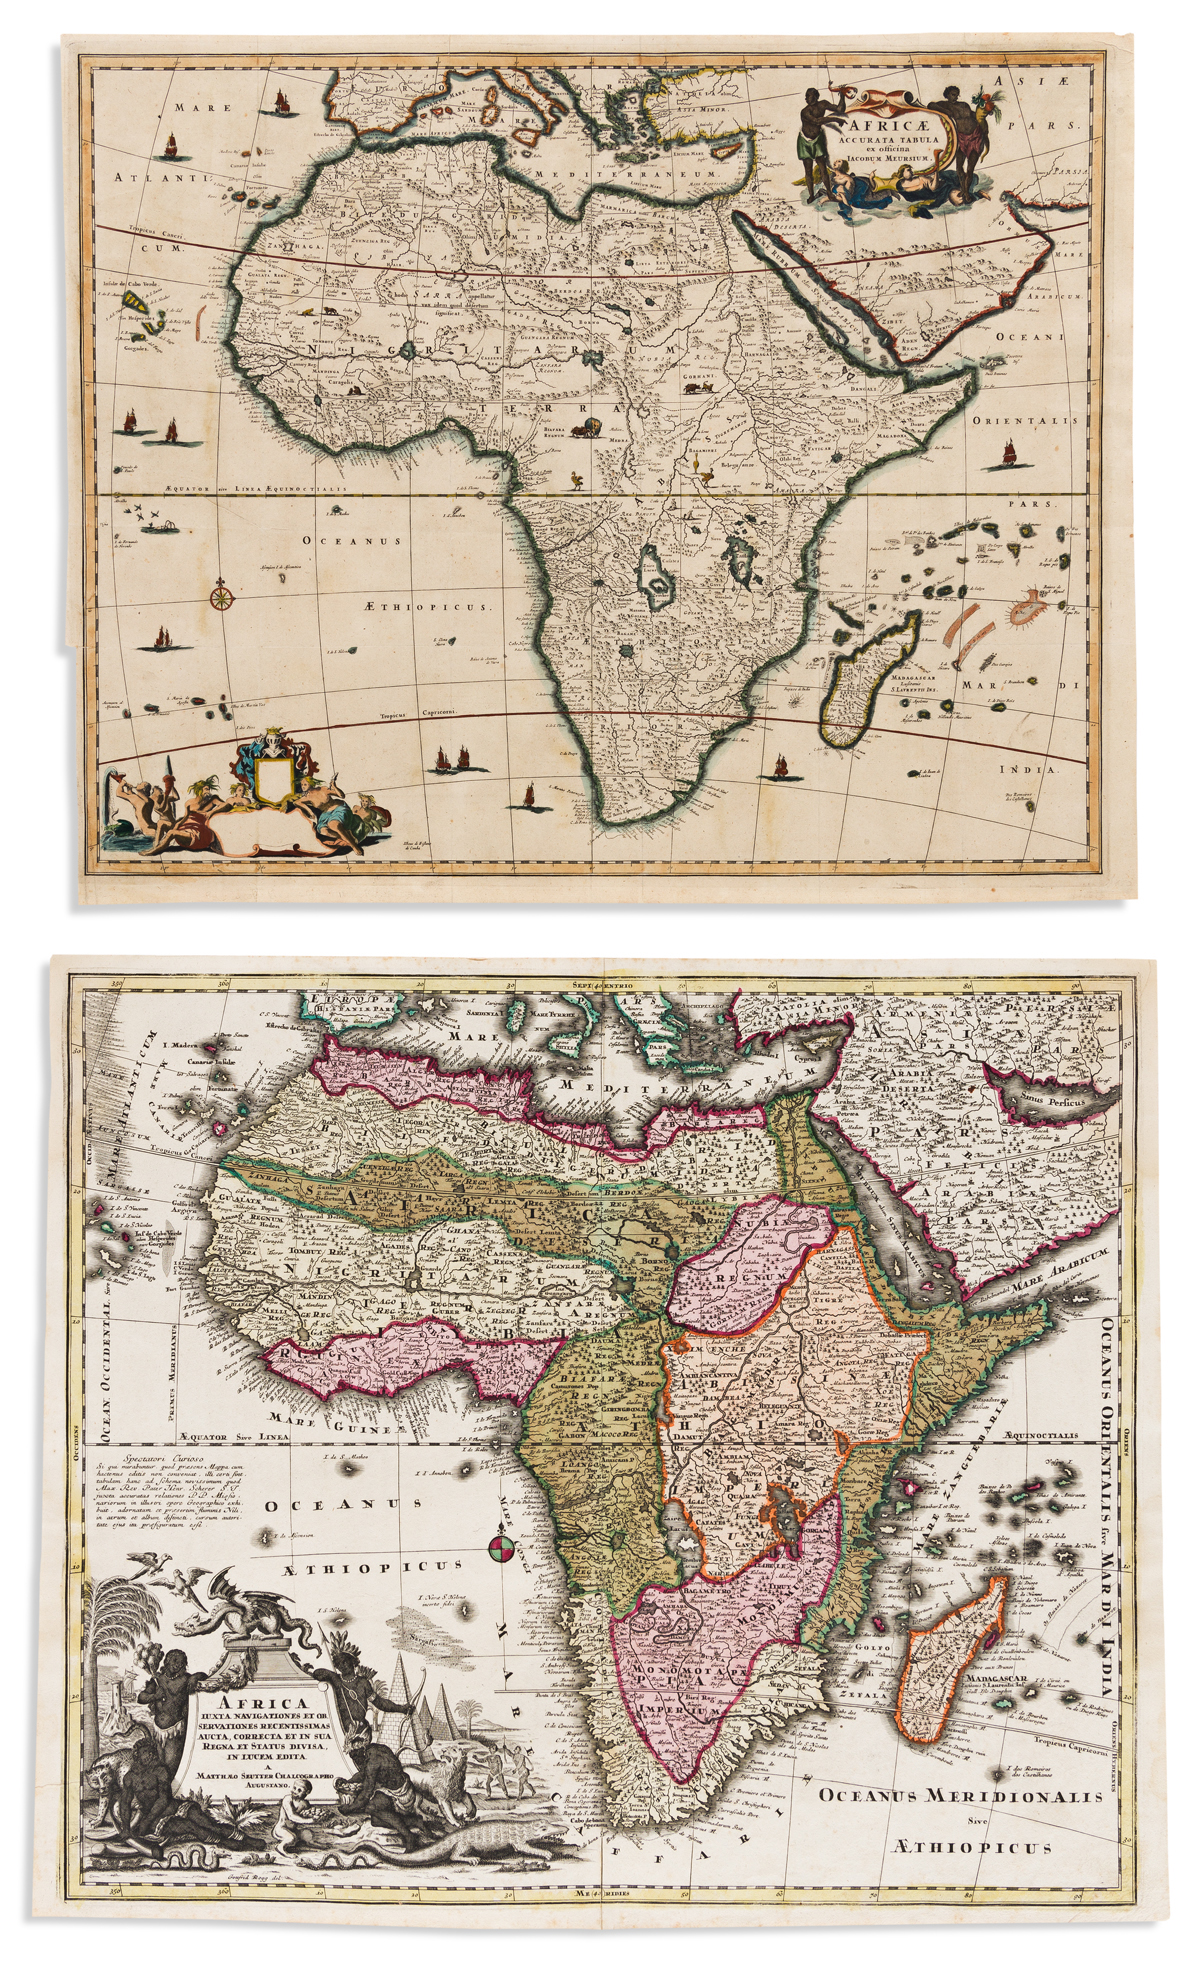 (AFRICA.) Two engraved maps of the continent.